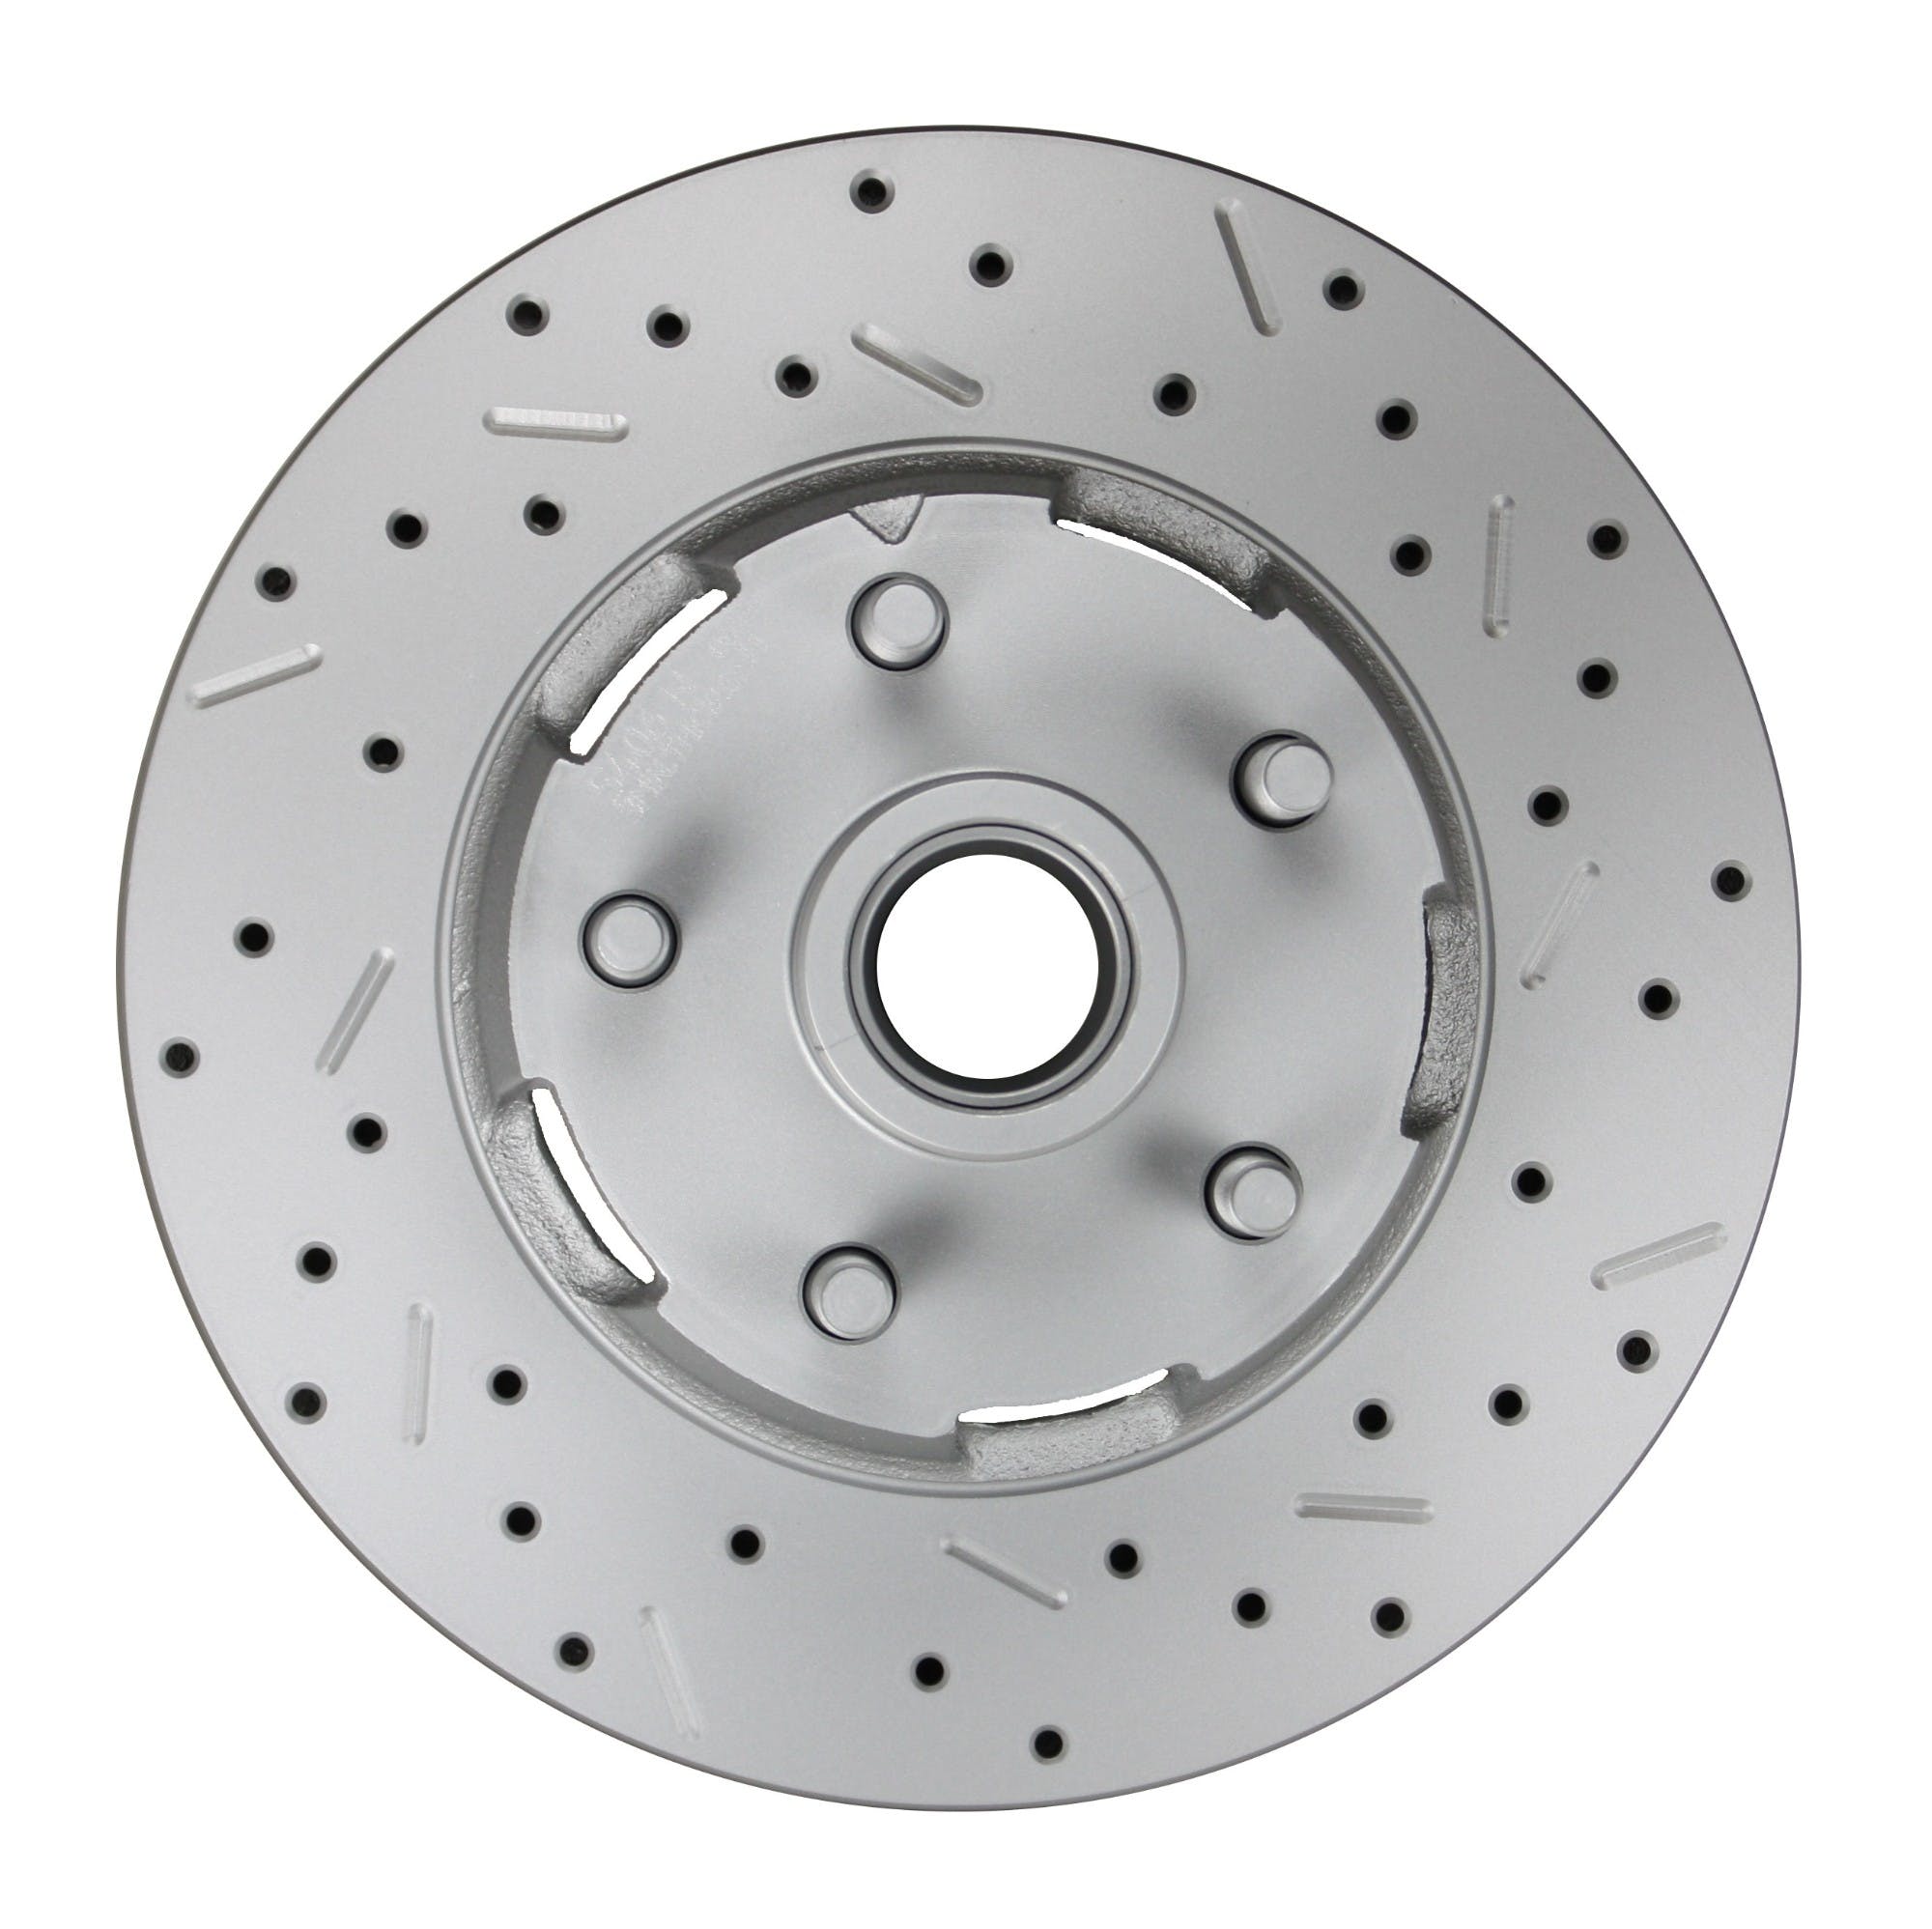 LEED Brakes 5406001 RCDS Rotor Right side Cross drilled and slotted